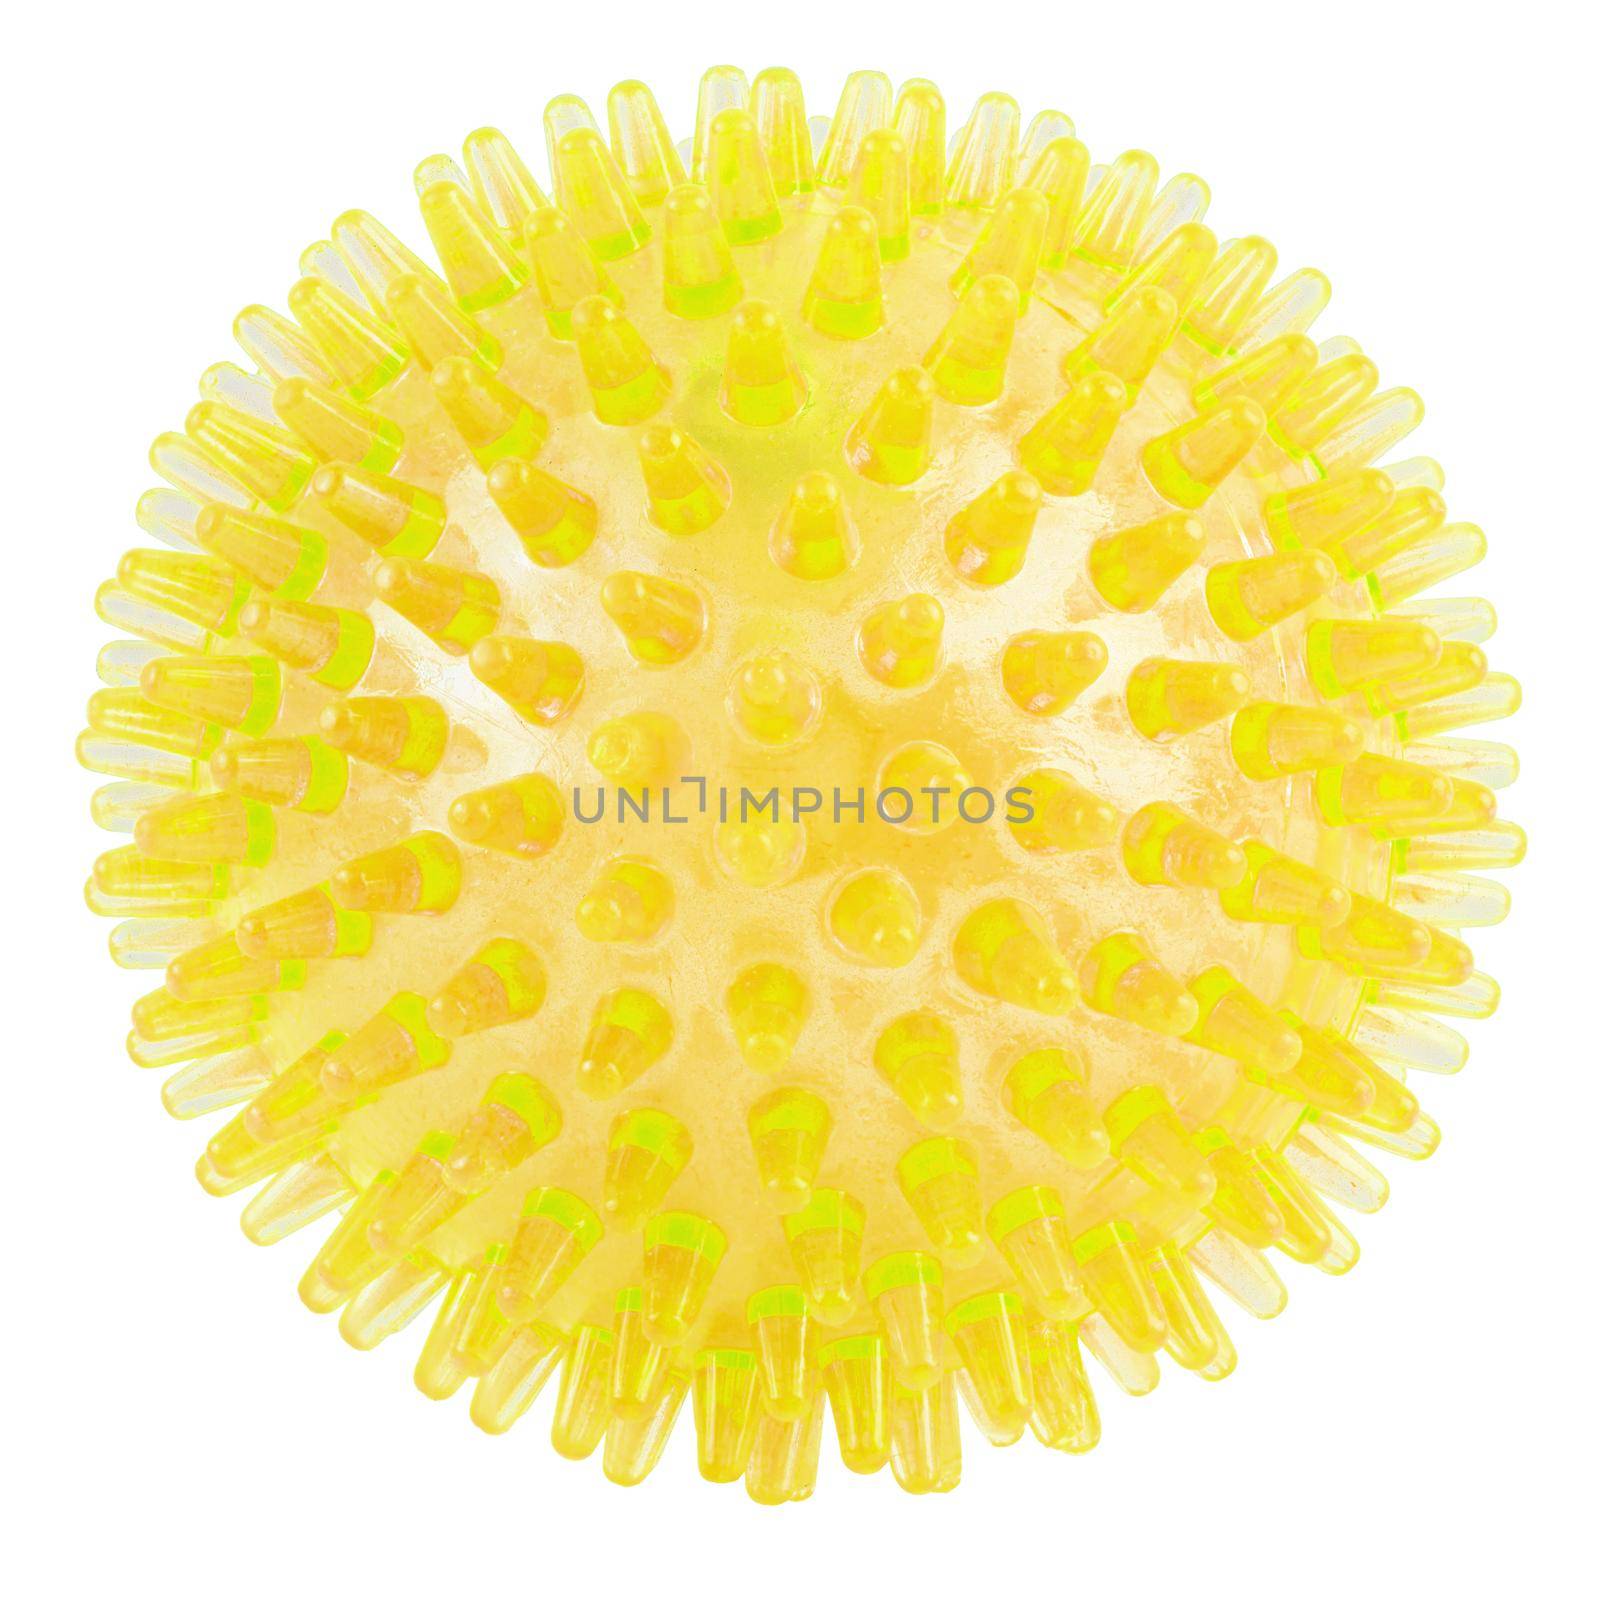 transparent yellow spiked plastic ball isolated on white background - massager, dog toy and COVID-19 coronavirus symbol and model